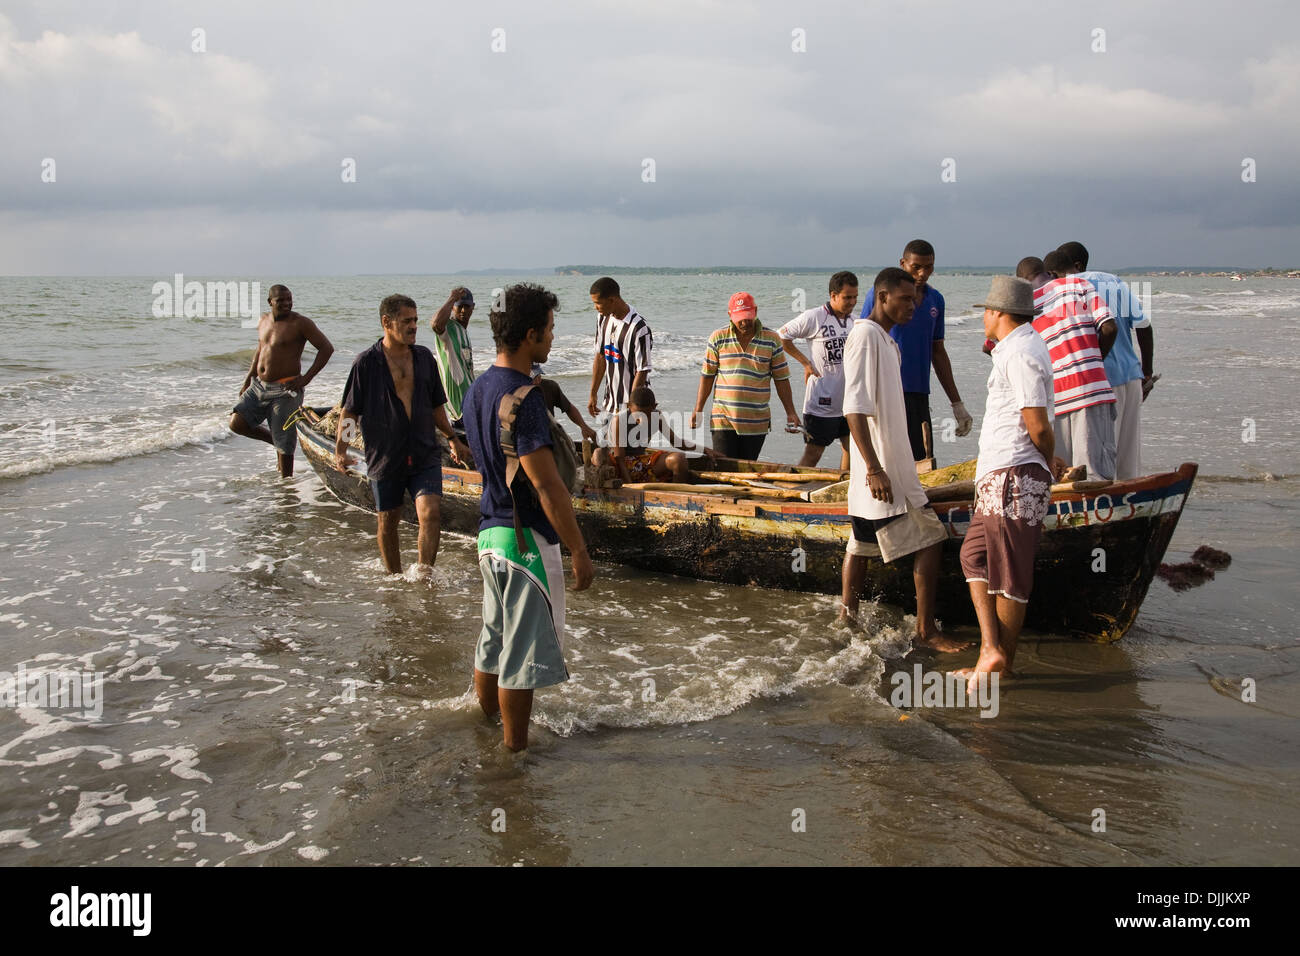 Artisan fishermen bringing in their catch, Colombia Stock Photo